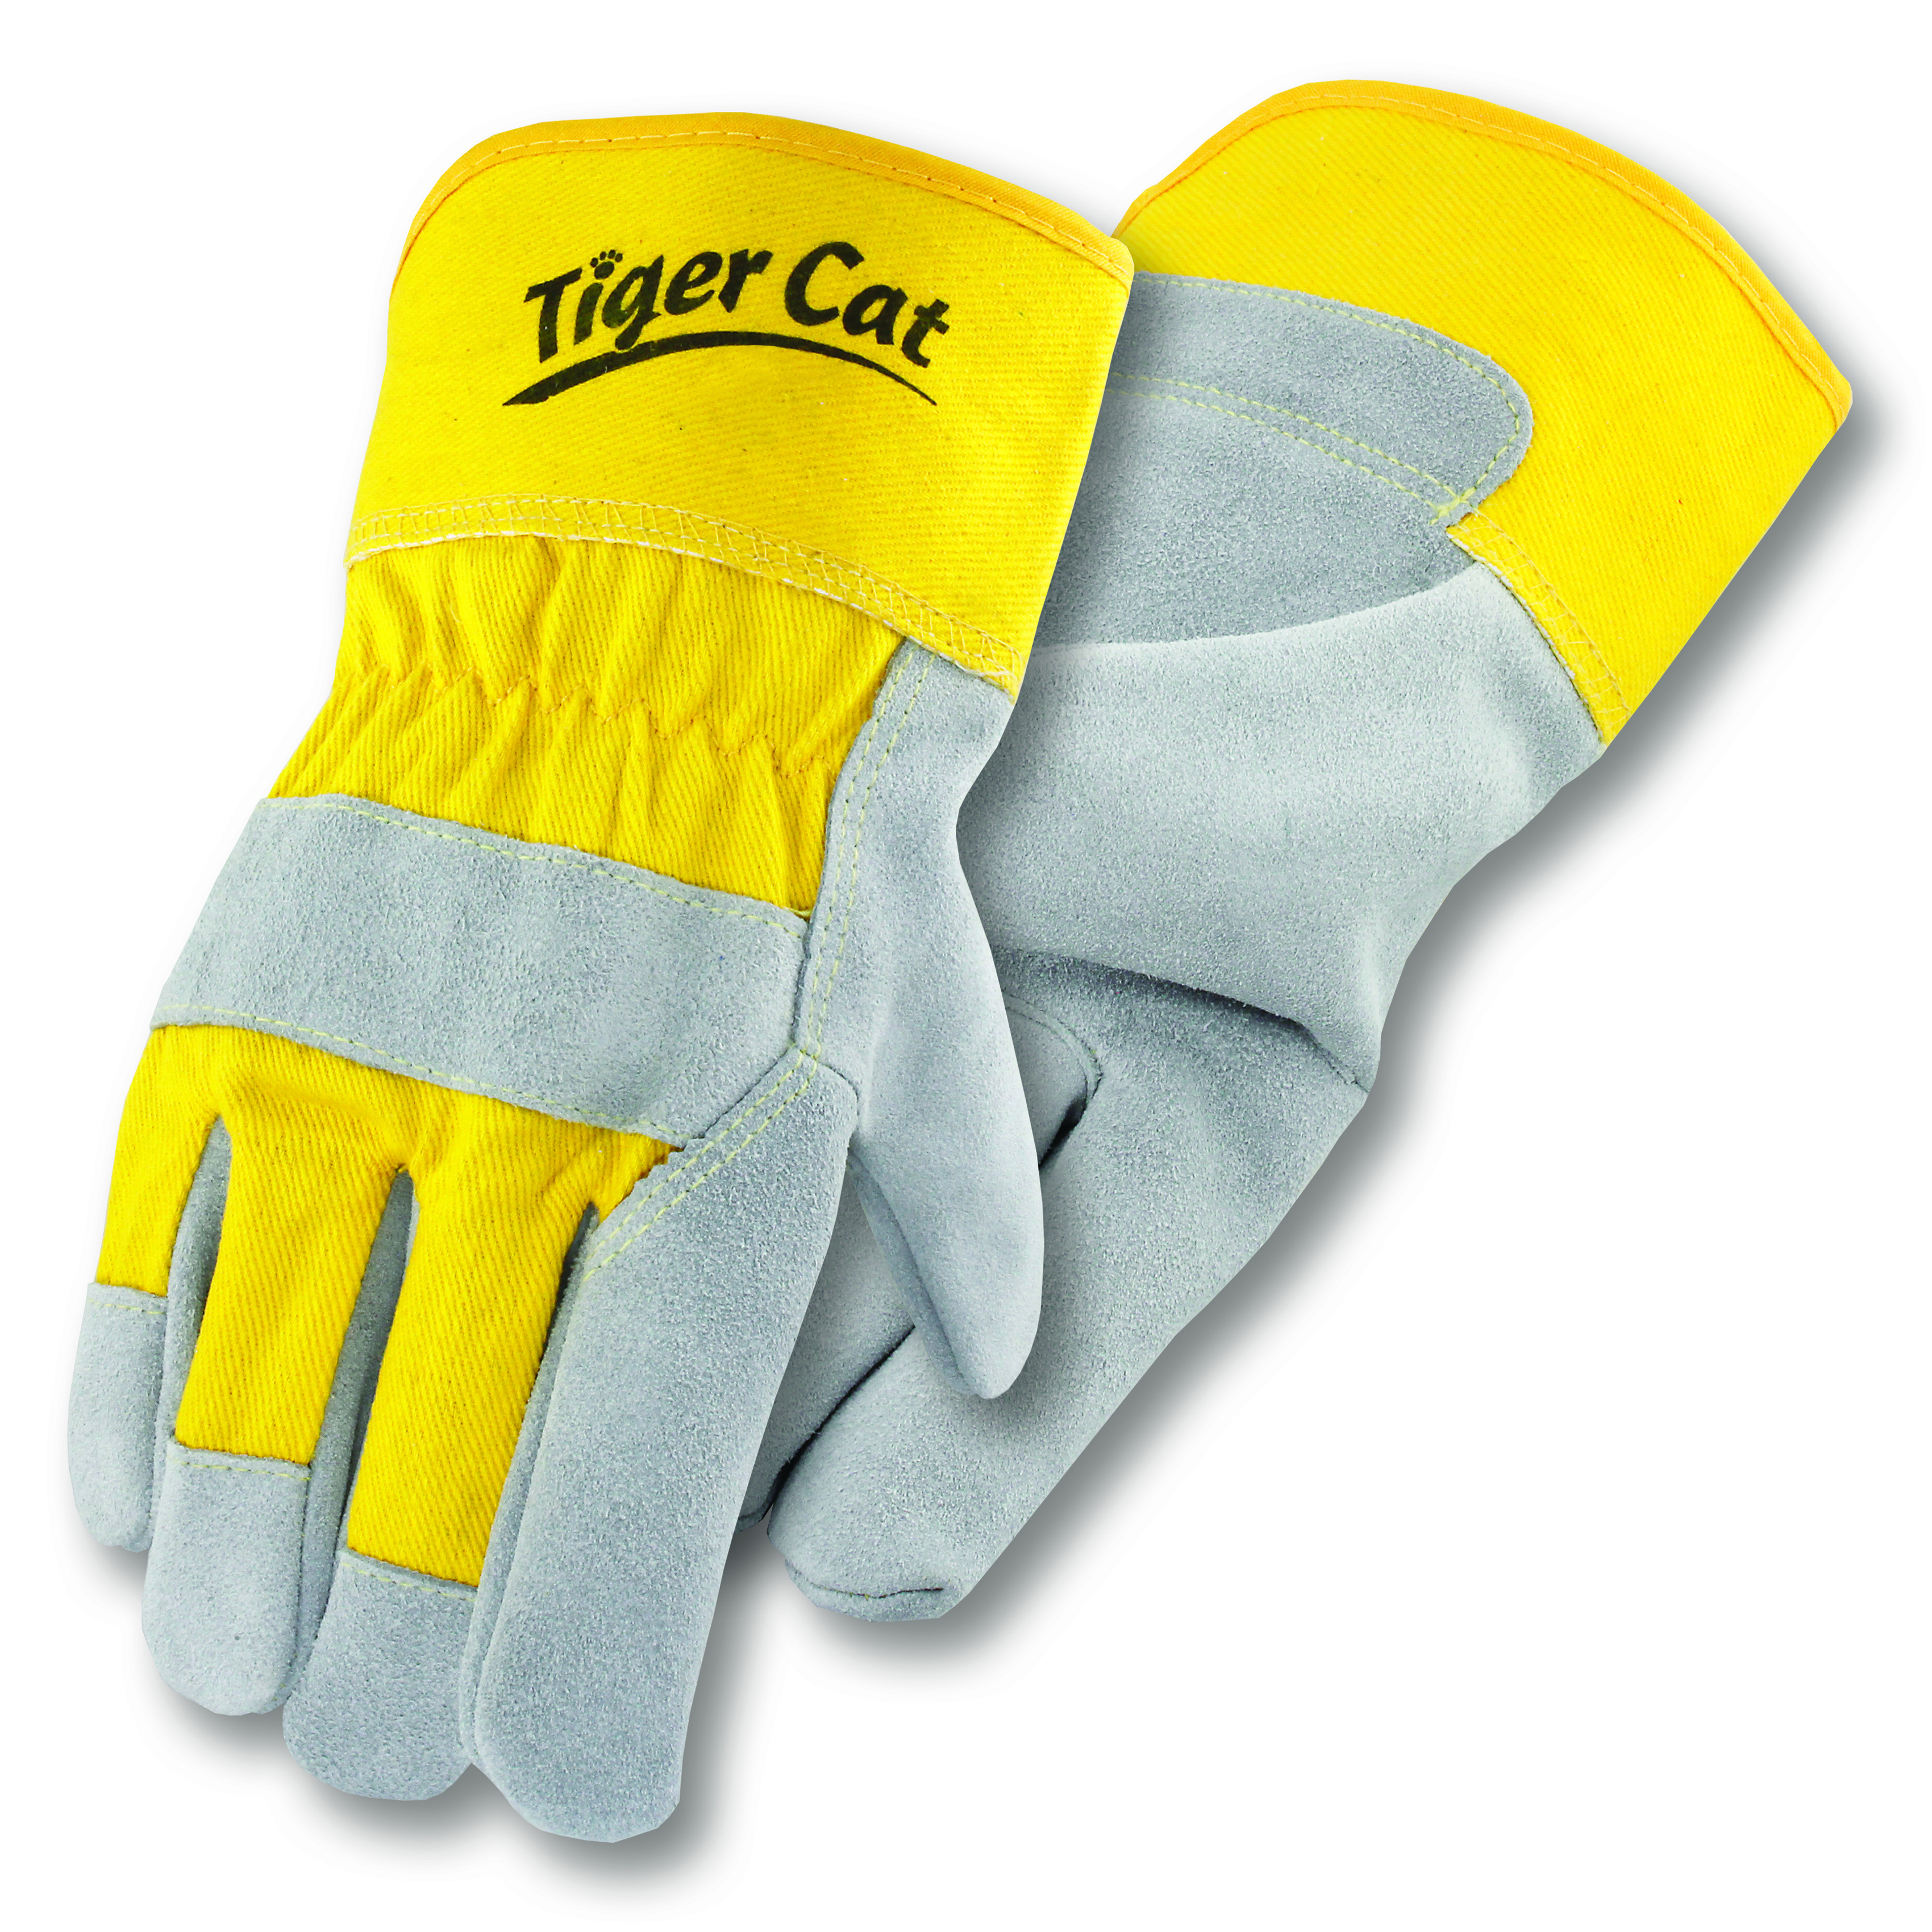 Tiger Cat&trade; Premium Leather Palm Gloves With Safety Cuff, Sewn with Cut Resistant Thread